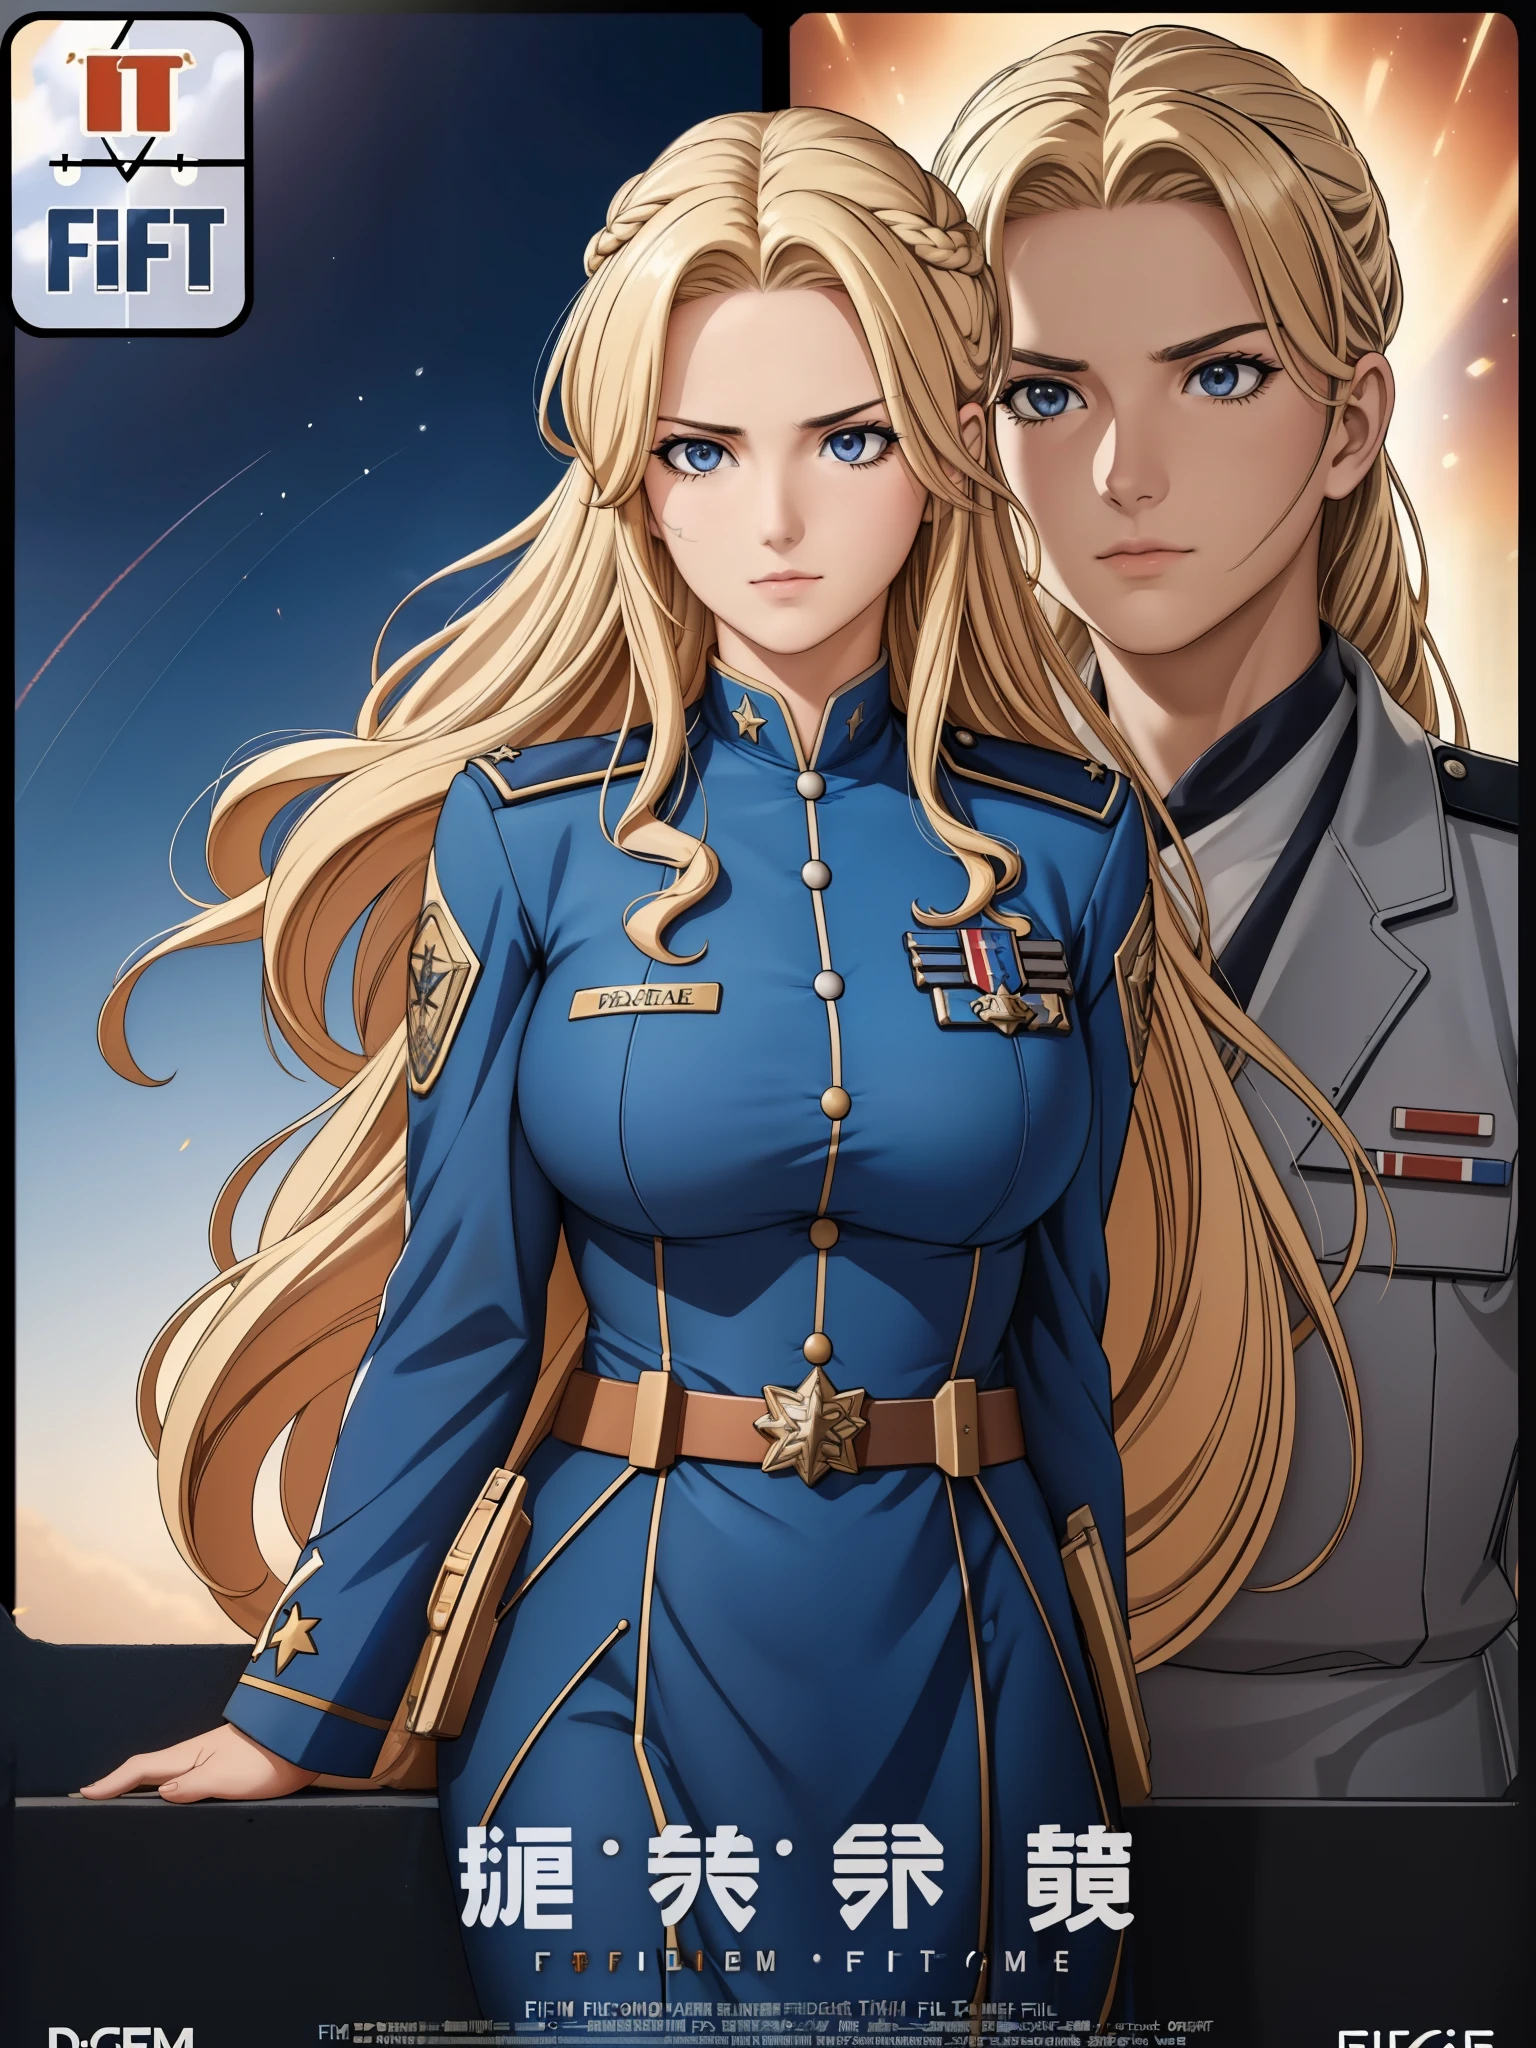 realistic,polite dress,(Fighter Action War Movie Poster),(Foundation Film Reference: 1.8),realistic,Air Force general uniform,(realistic face resolution),movie pose,adult,skinny,big,A long-haired dark blonde woman,serious face,SF,SF,Various support characters